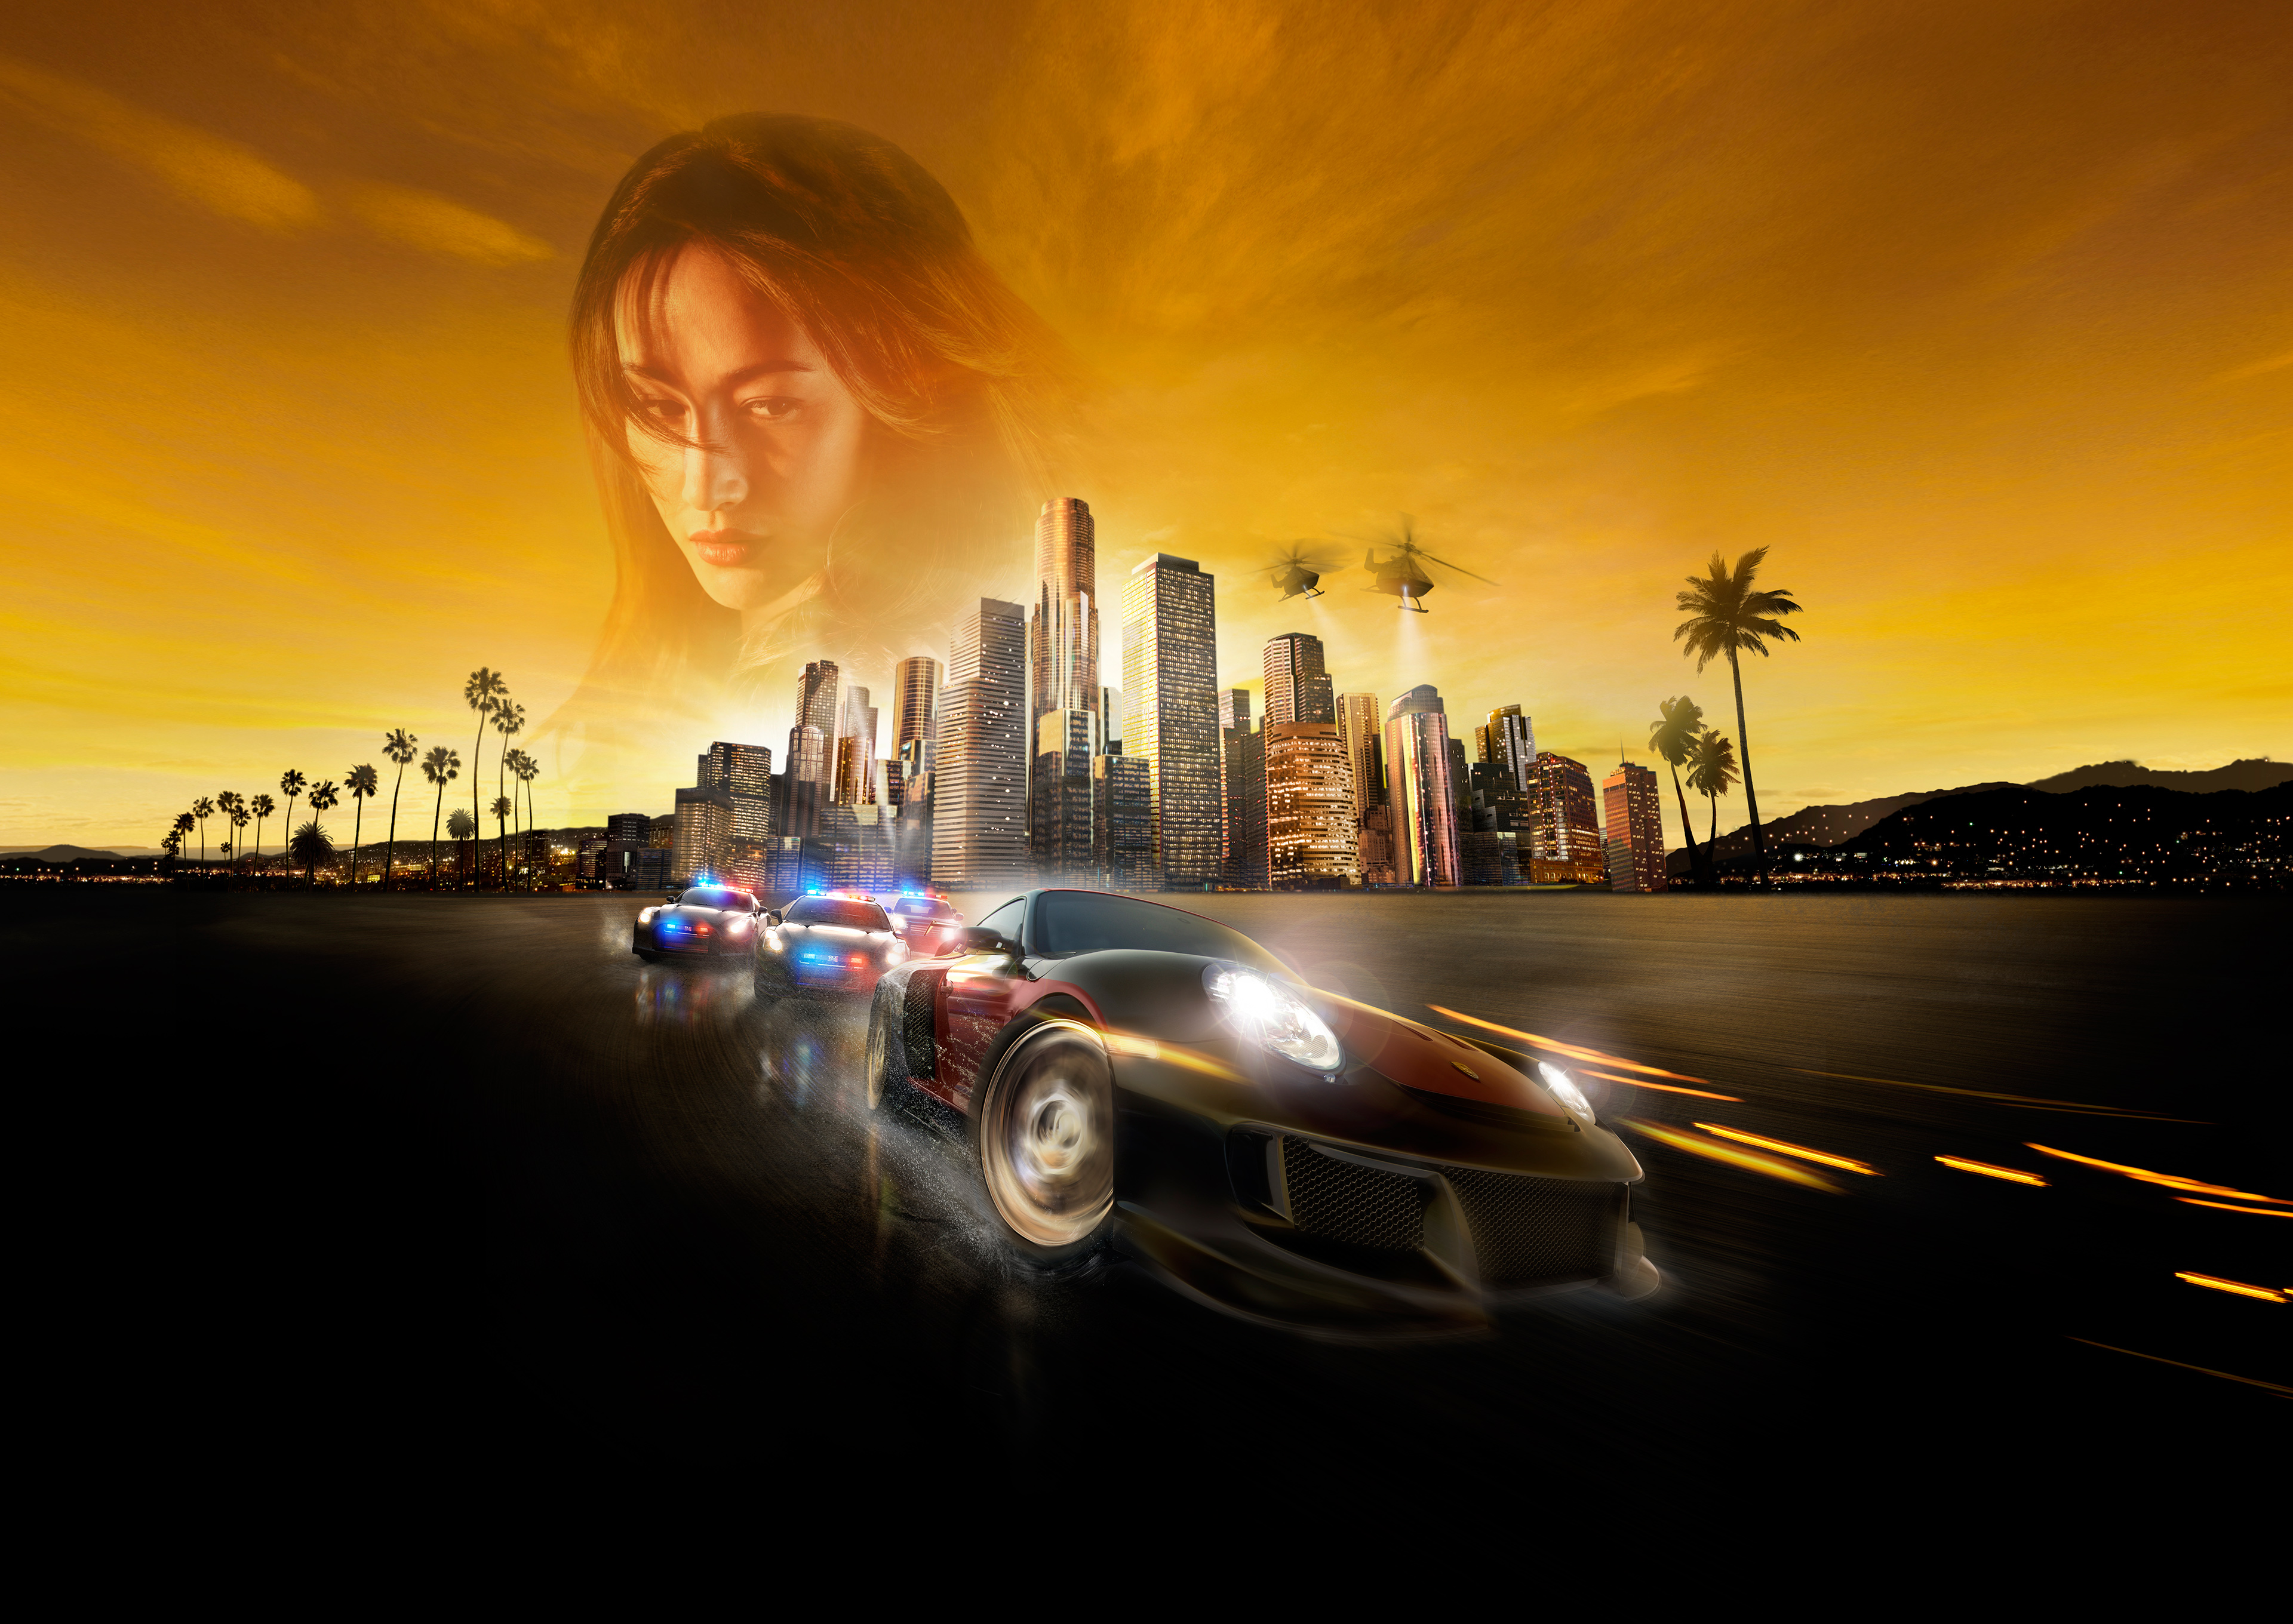 need for speed undercover apk